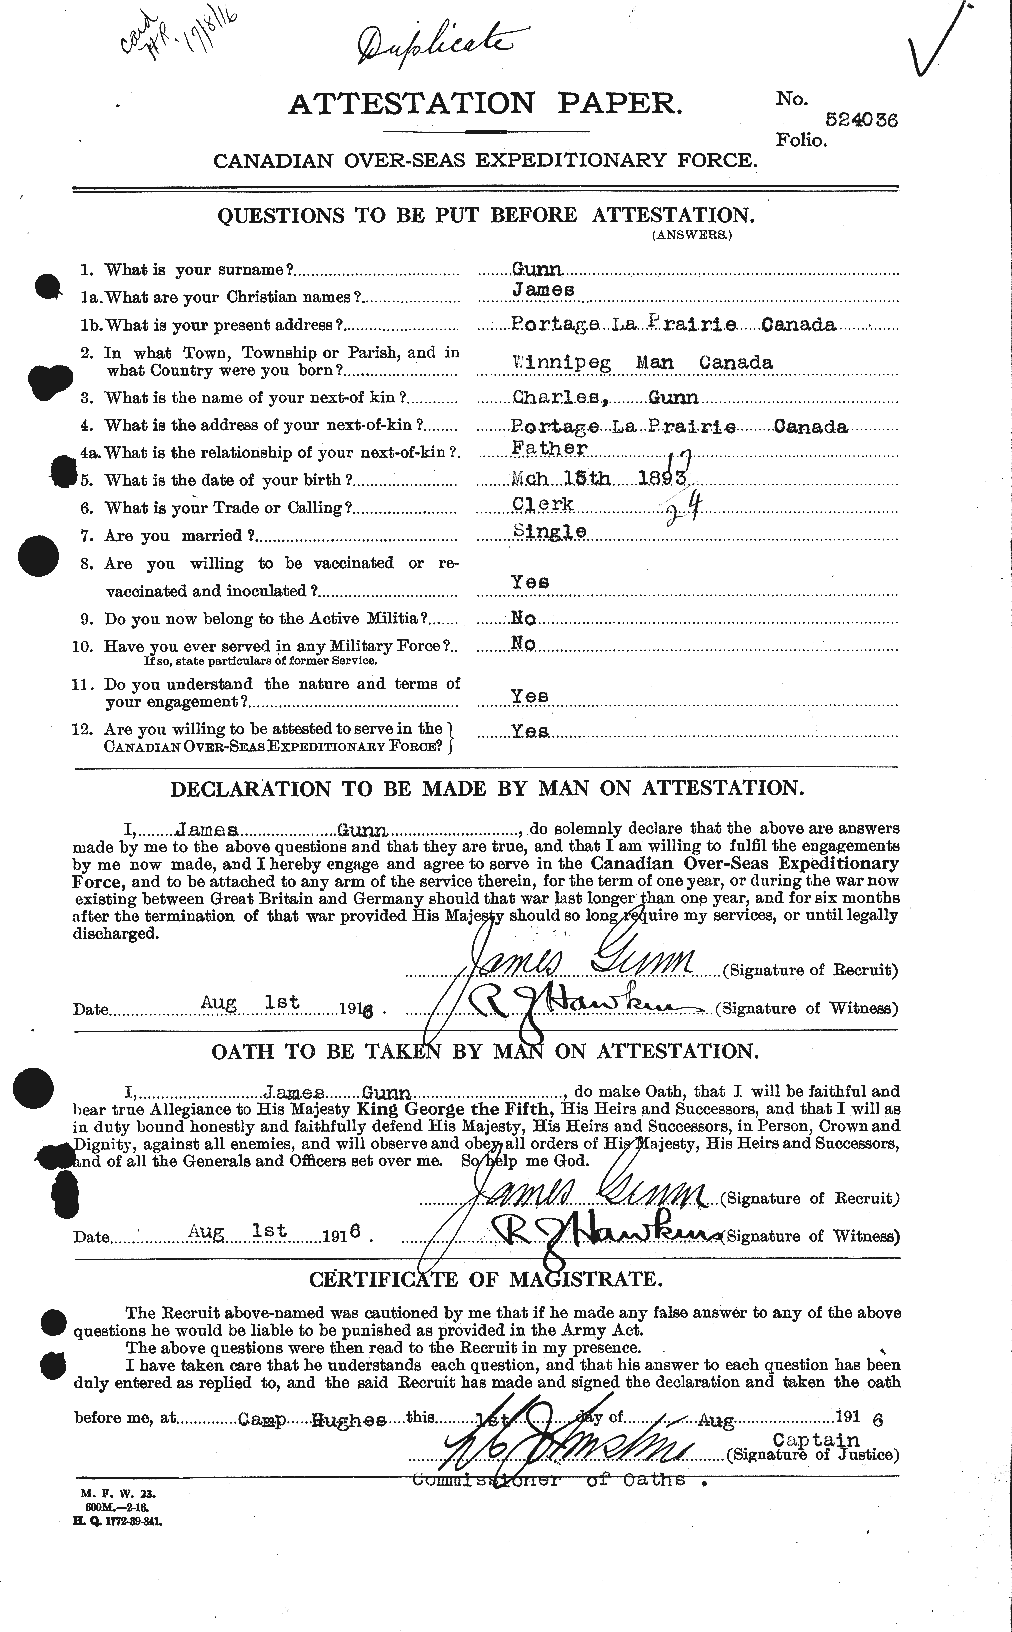 Personnel Records of the First World War - CEF 369272a